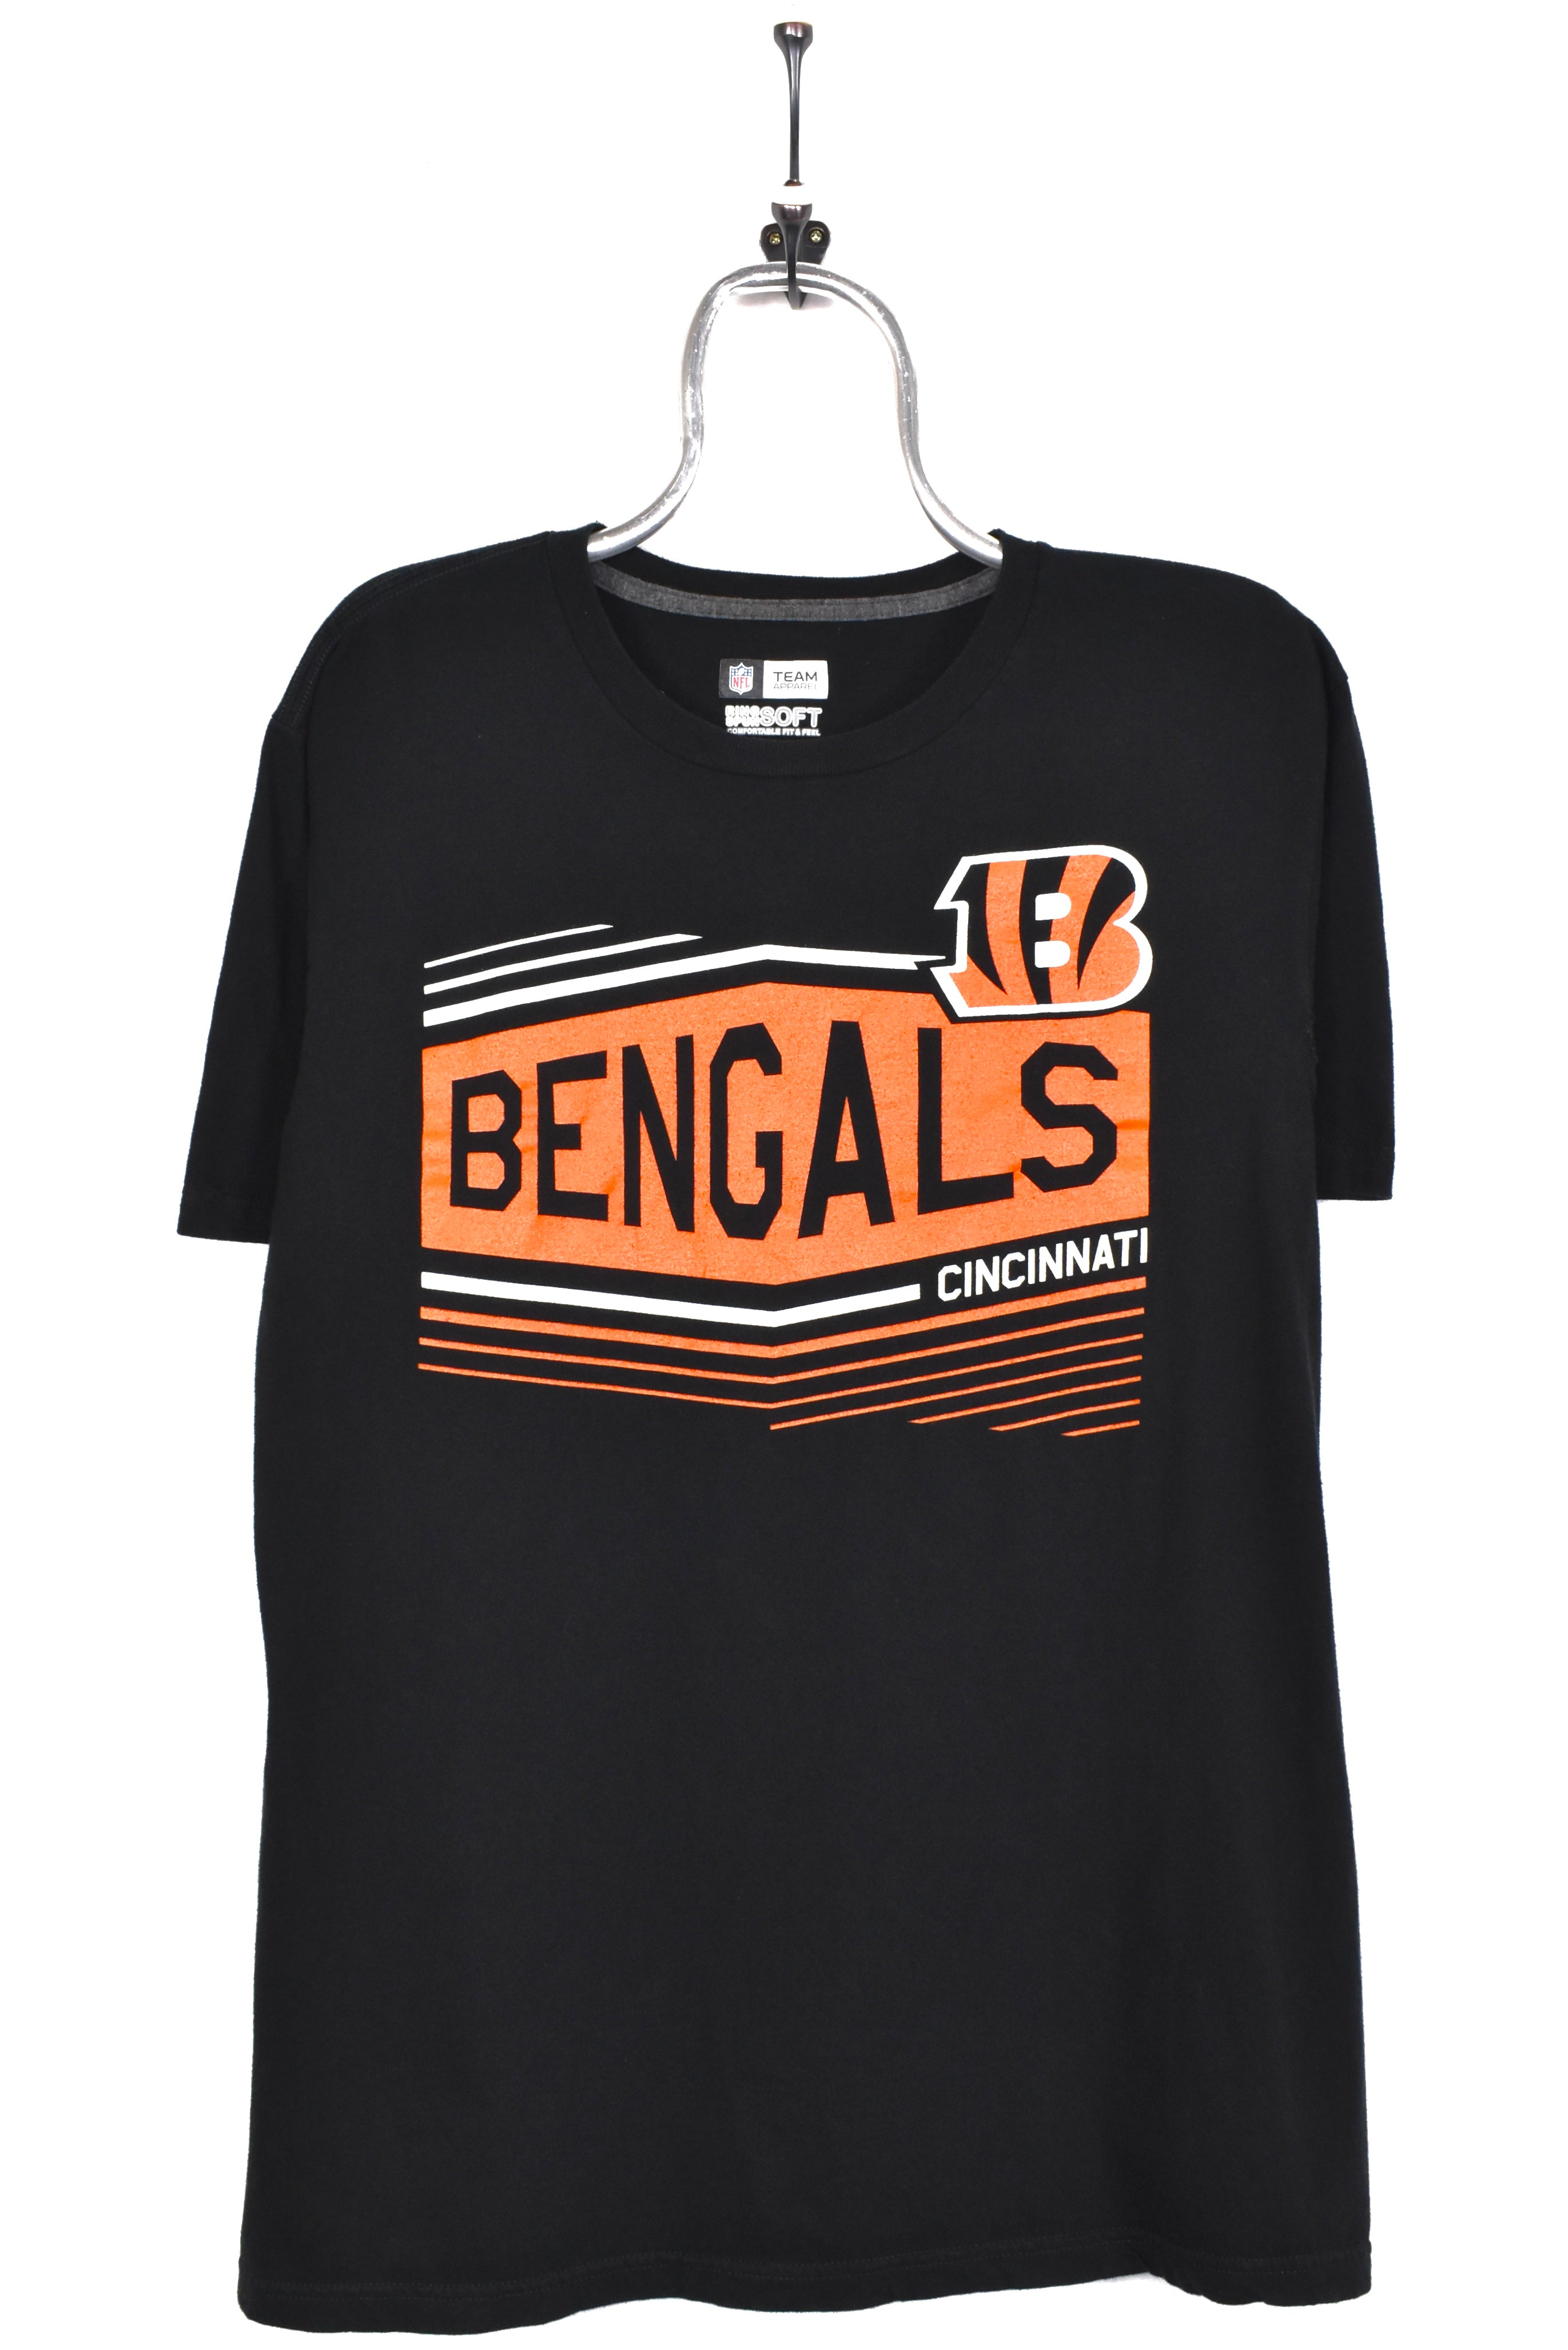 bengals jerseys for sale